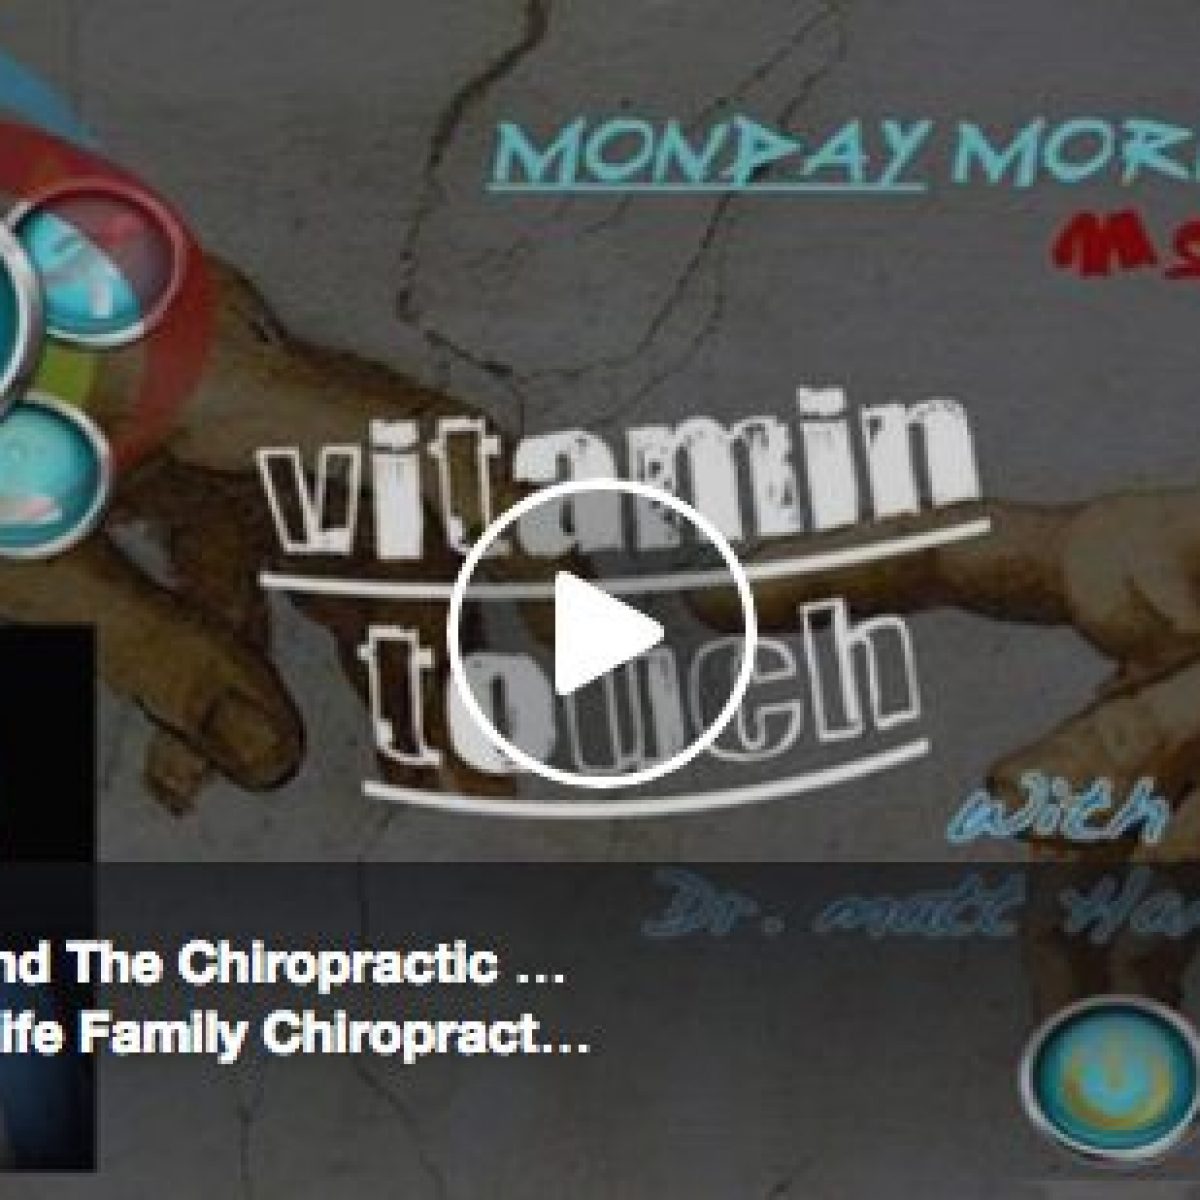 Vitamin Touch & The Chiropractic Approach